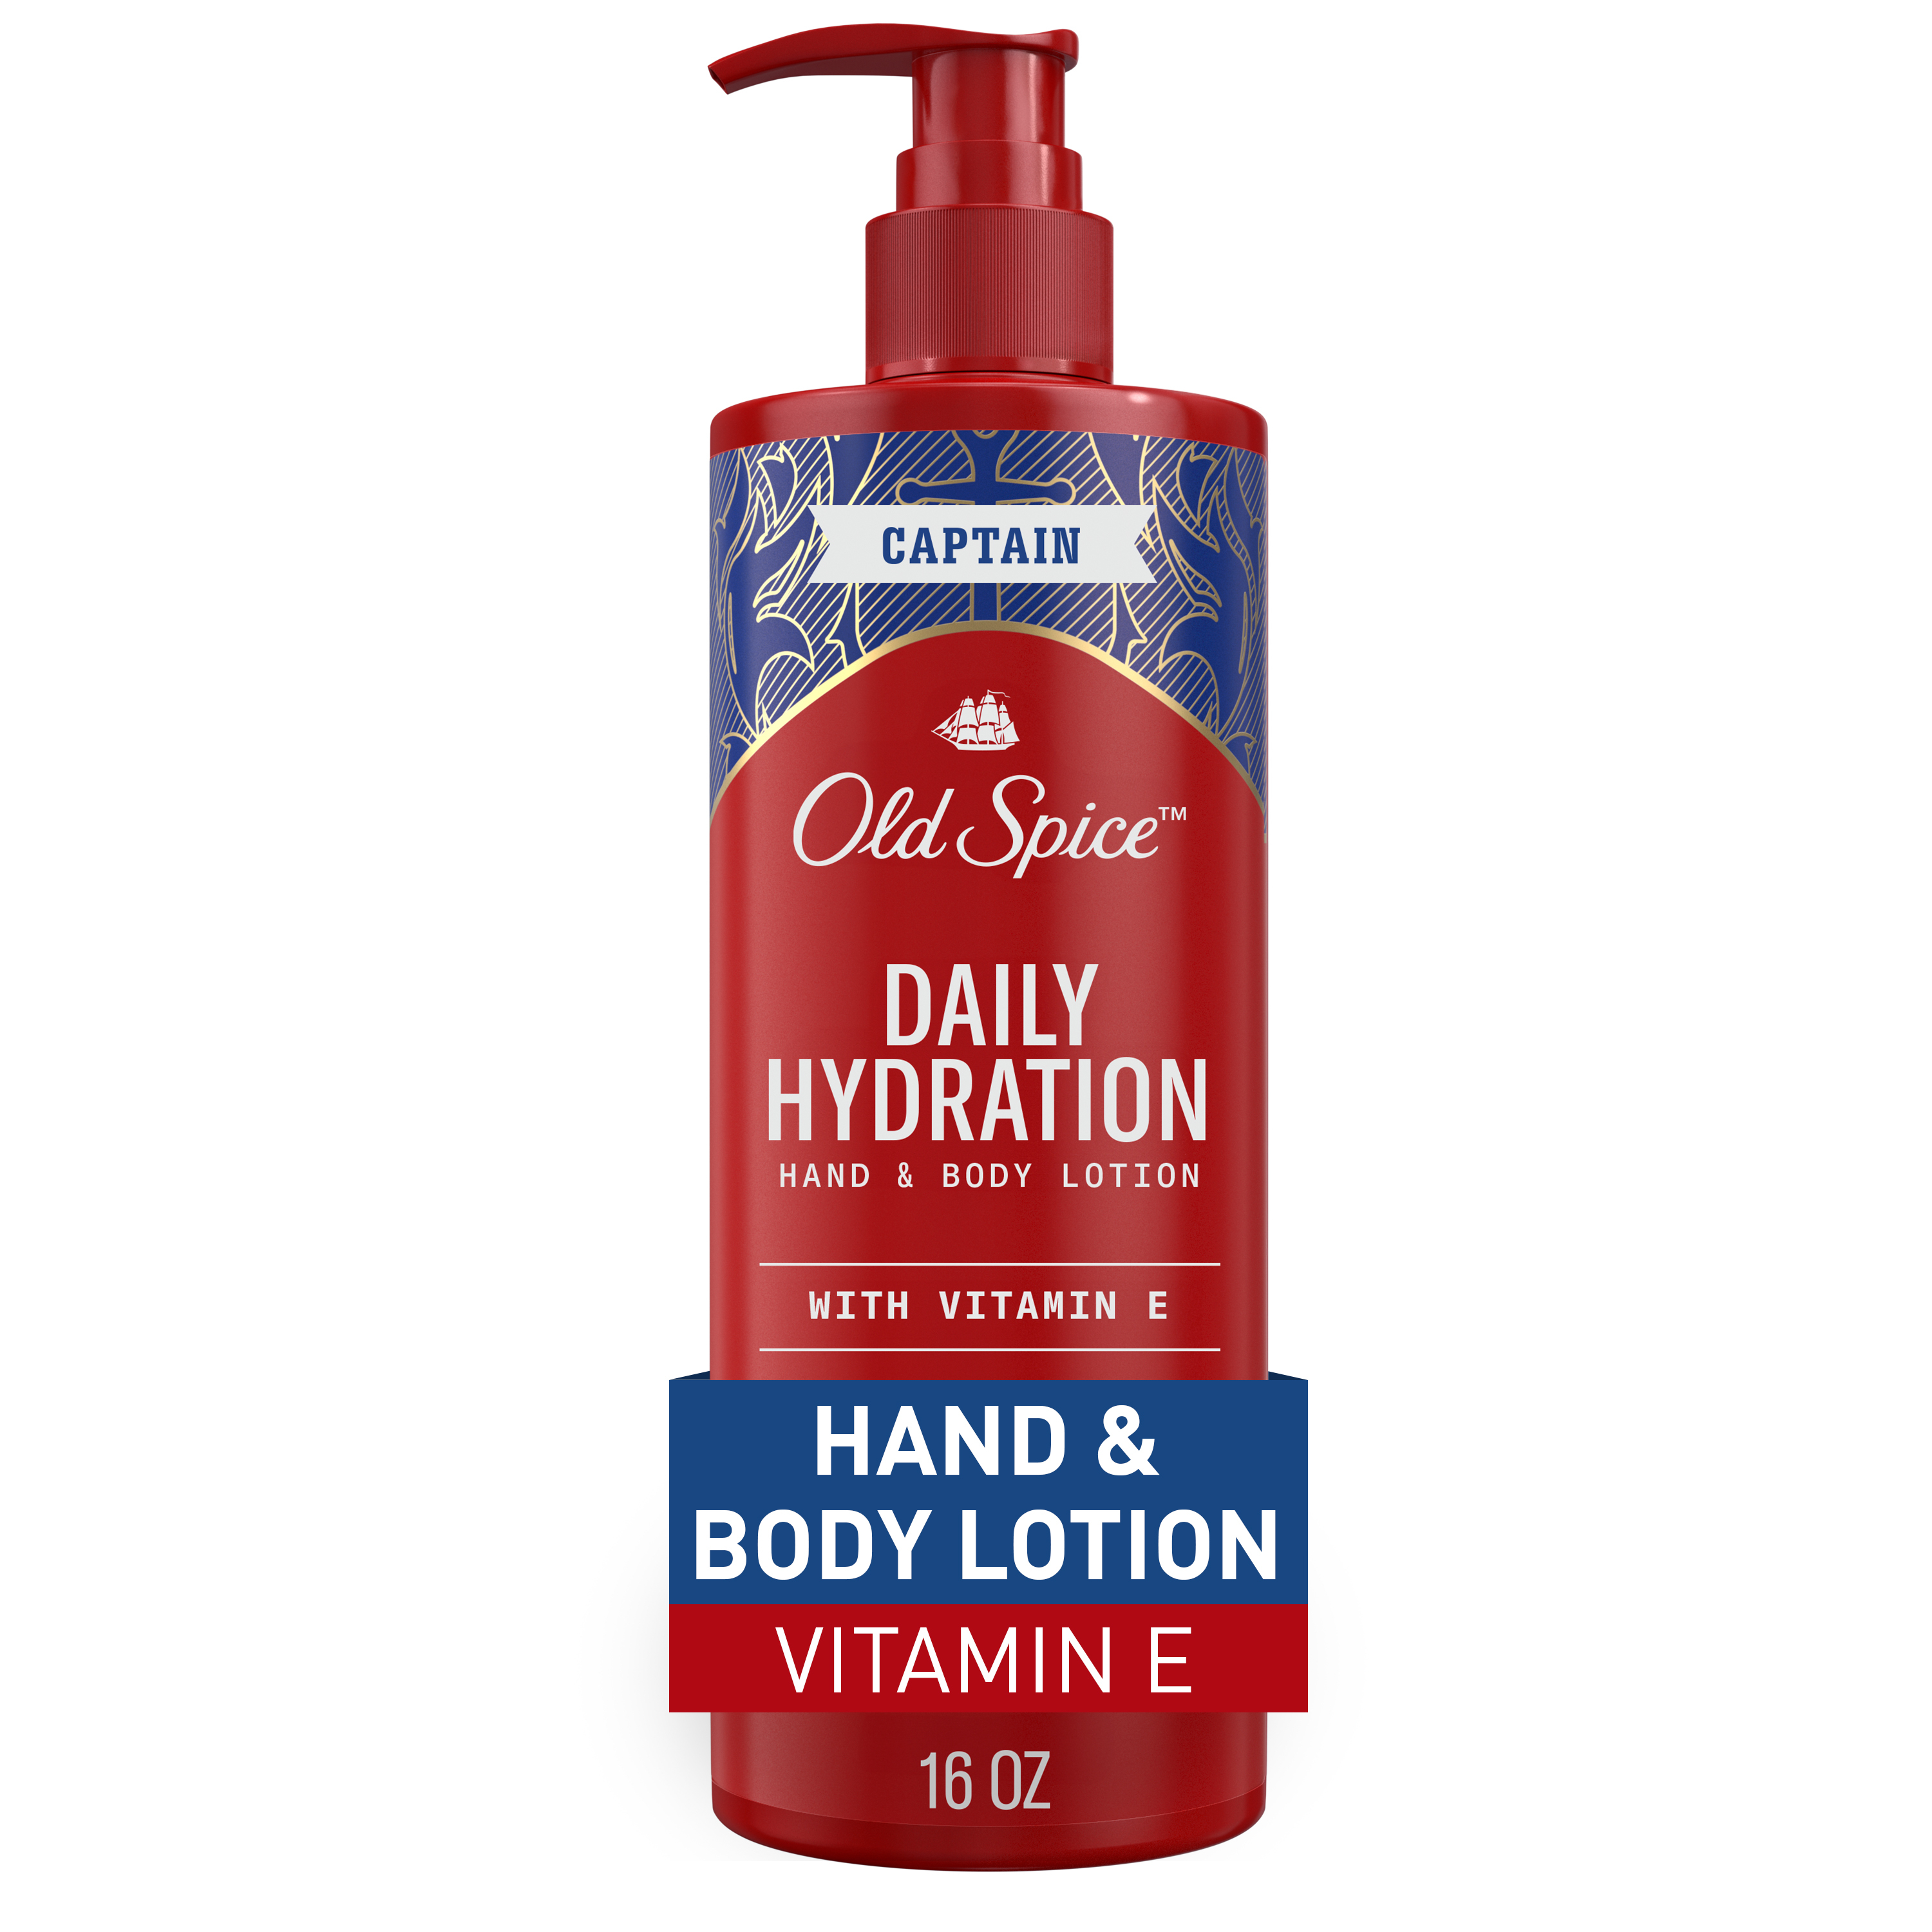 Old Spice Daily Hydration Hand & Body Lotion with Vitamin E, 16 fl oz - image 1 of 8